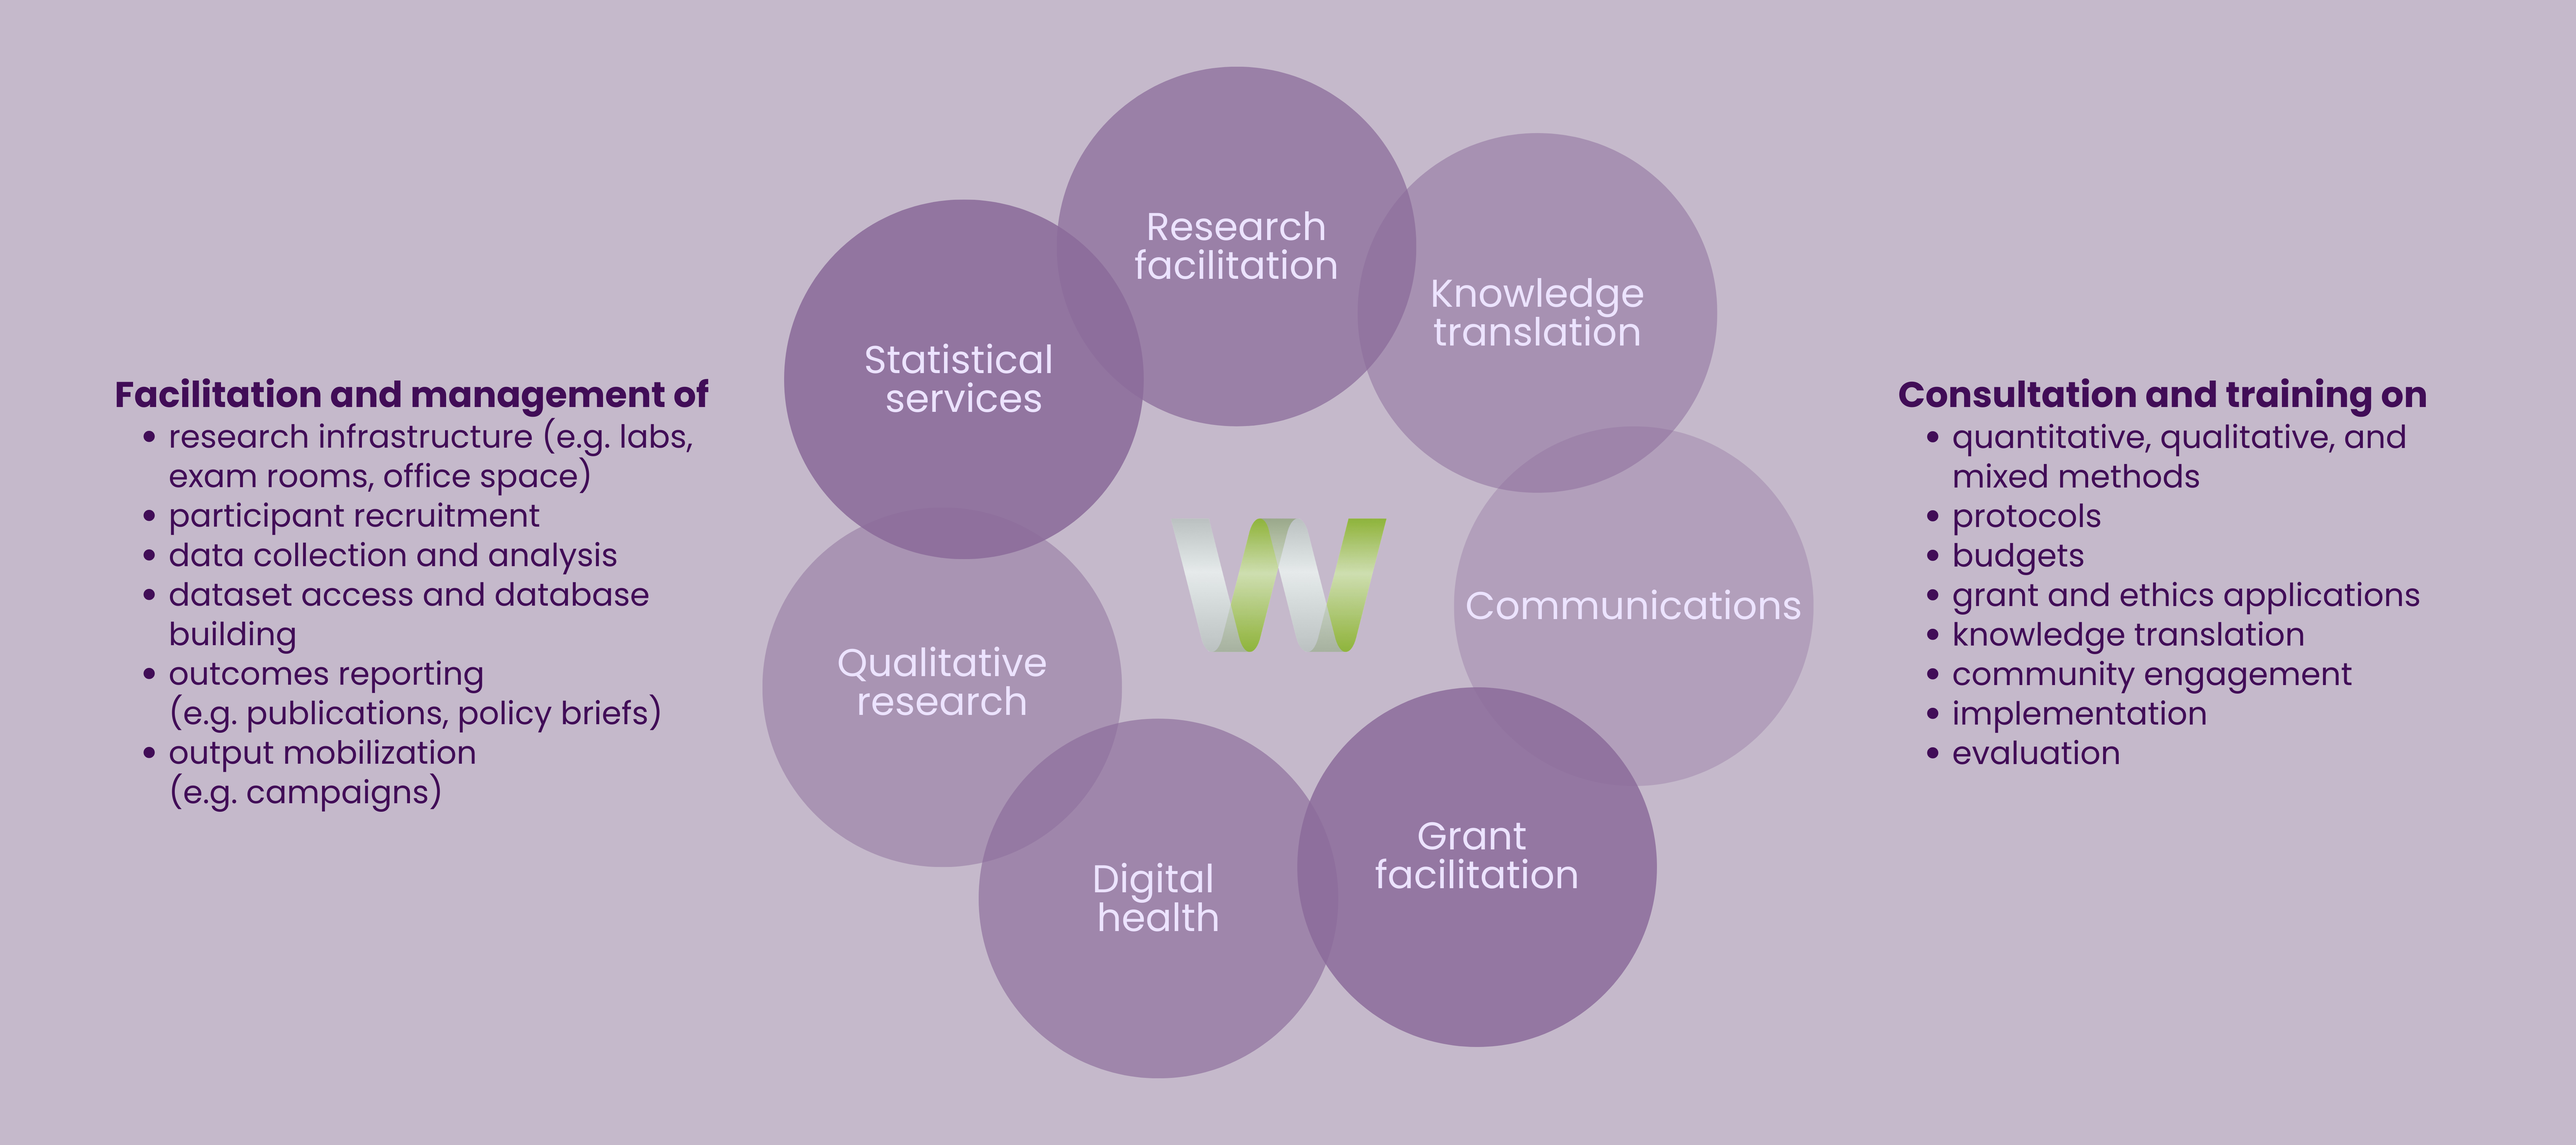 A diagram of Women's Health Research Institute Services. The diagram has our green W logo in the middle of a circle. The circle around it lists our services: Research facilitation, statistical services, qualitative research, digital health, grant facilitation, communications, and knowledge translation. On the left it lists more details about facilitation and management. On the left it lists details about consultation and management. The background is a light purple.